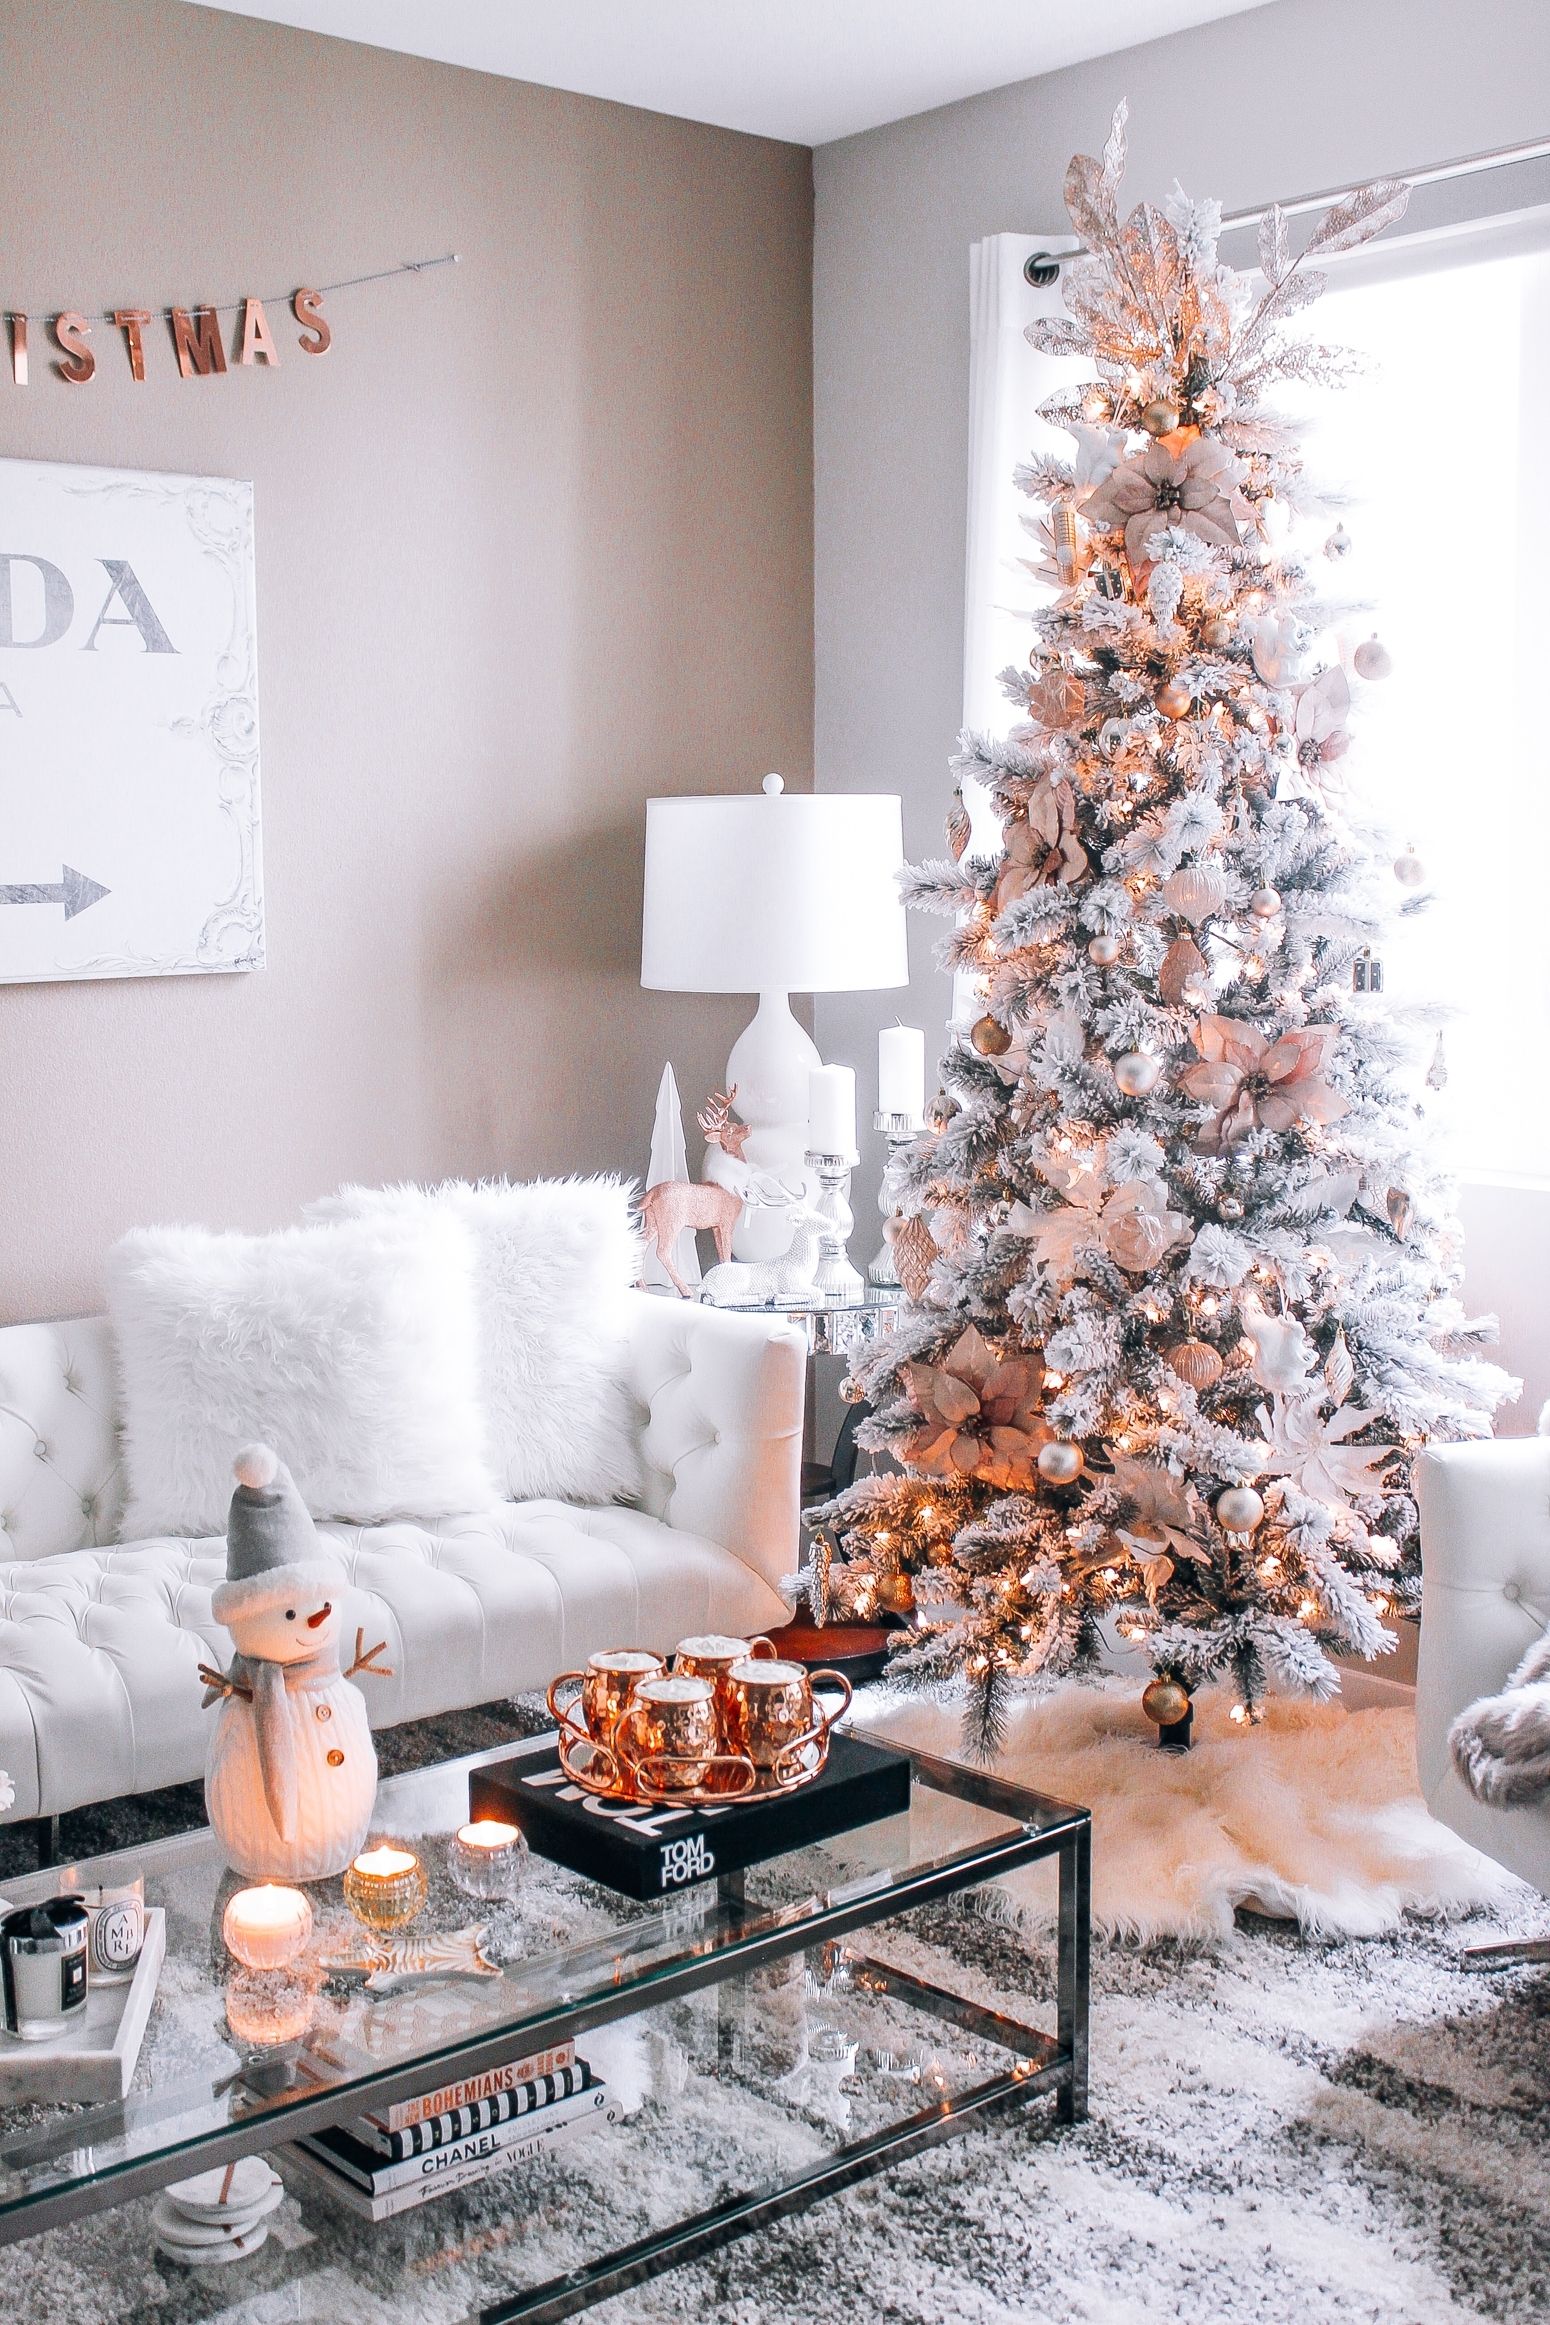 Rose Gold Christmas Ornaments You'll Love in 2020